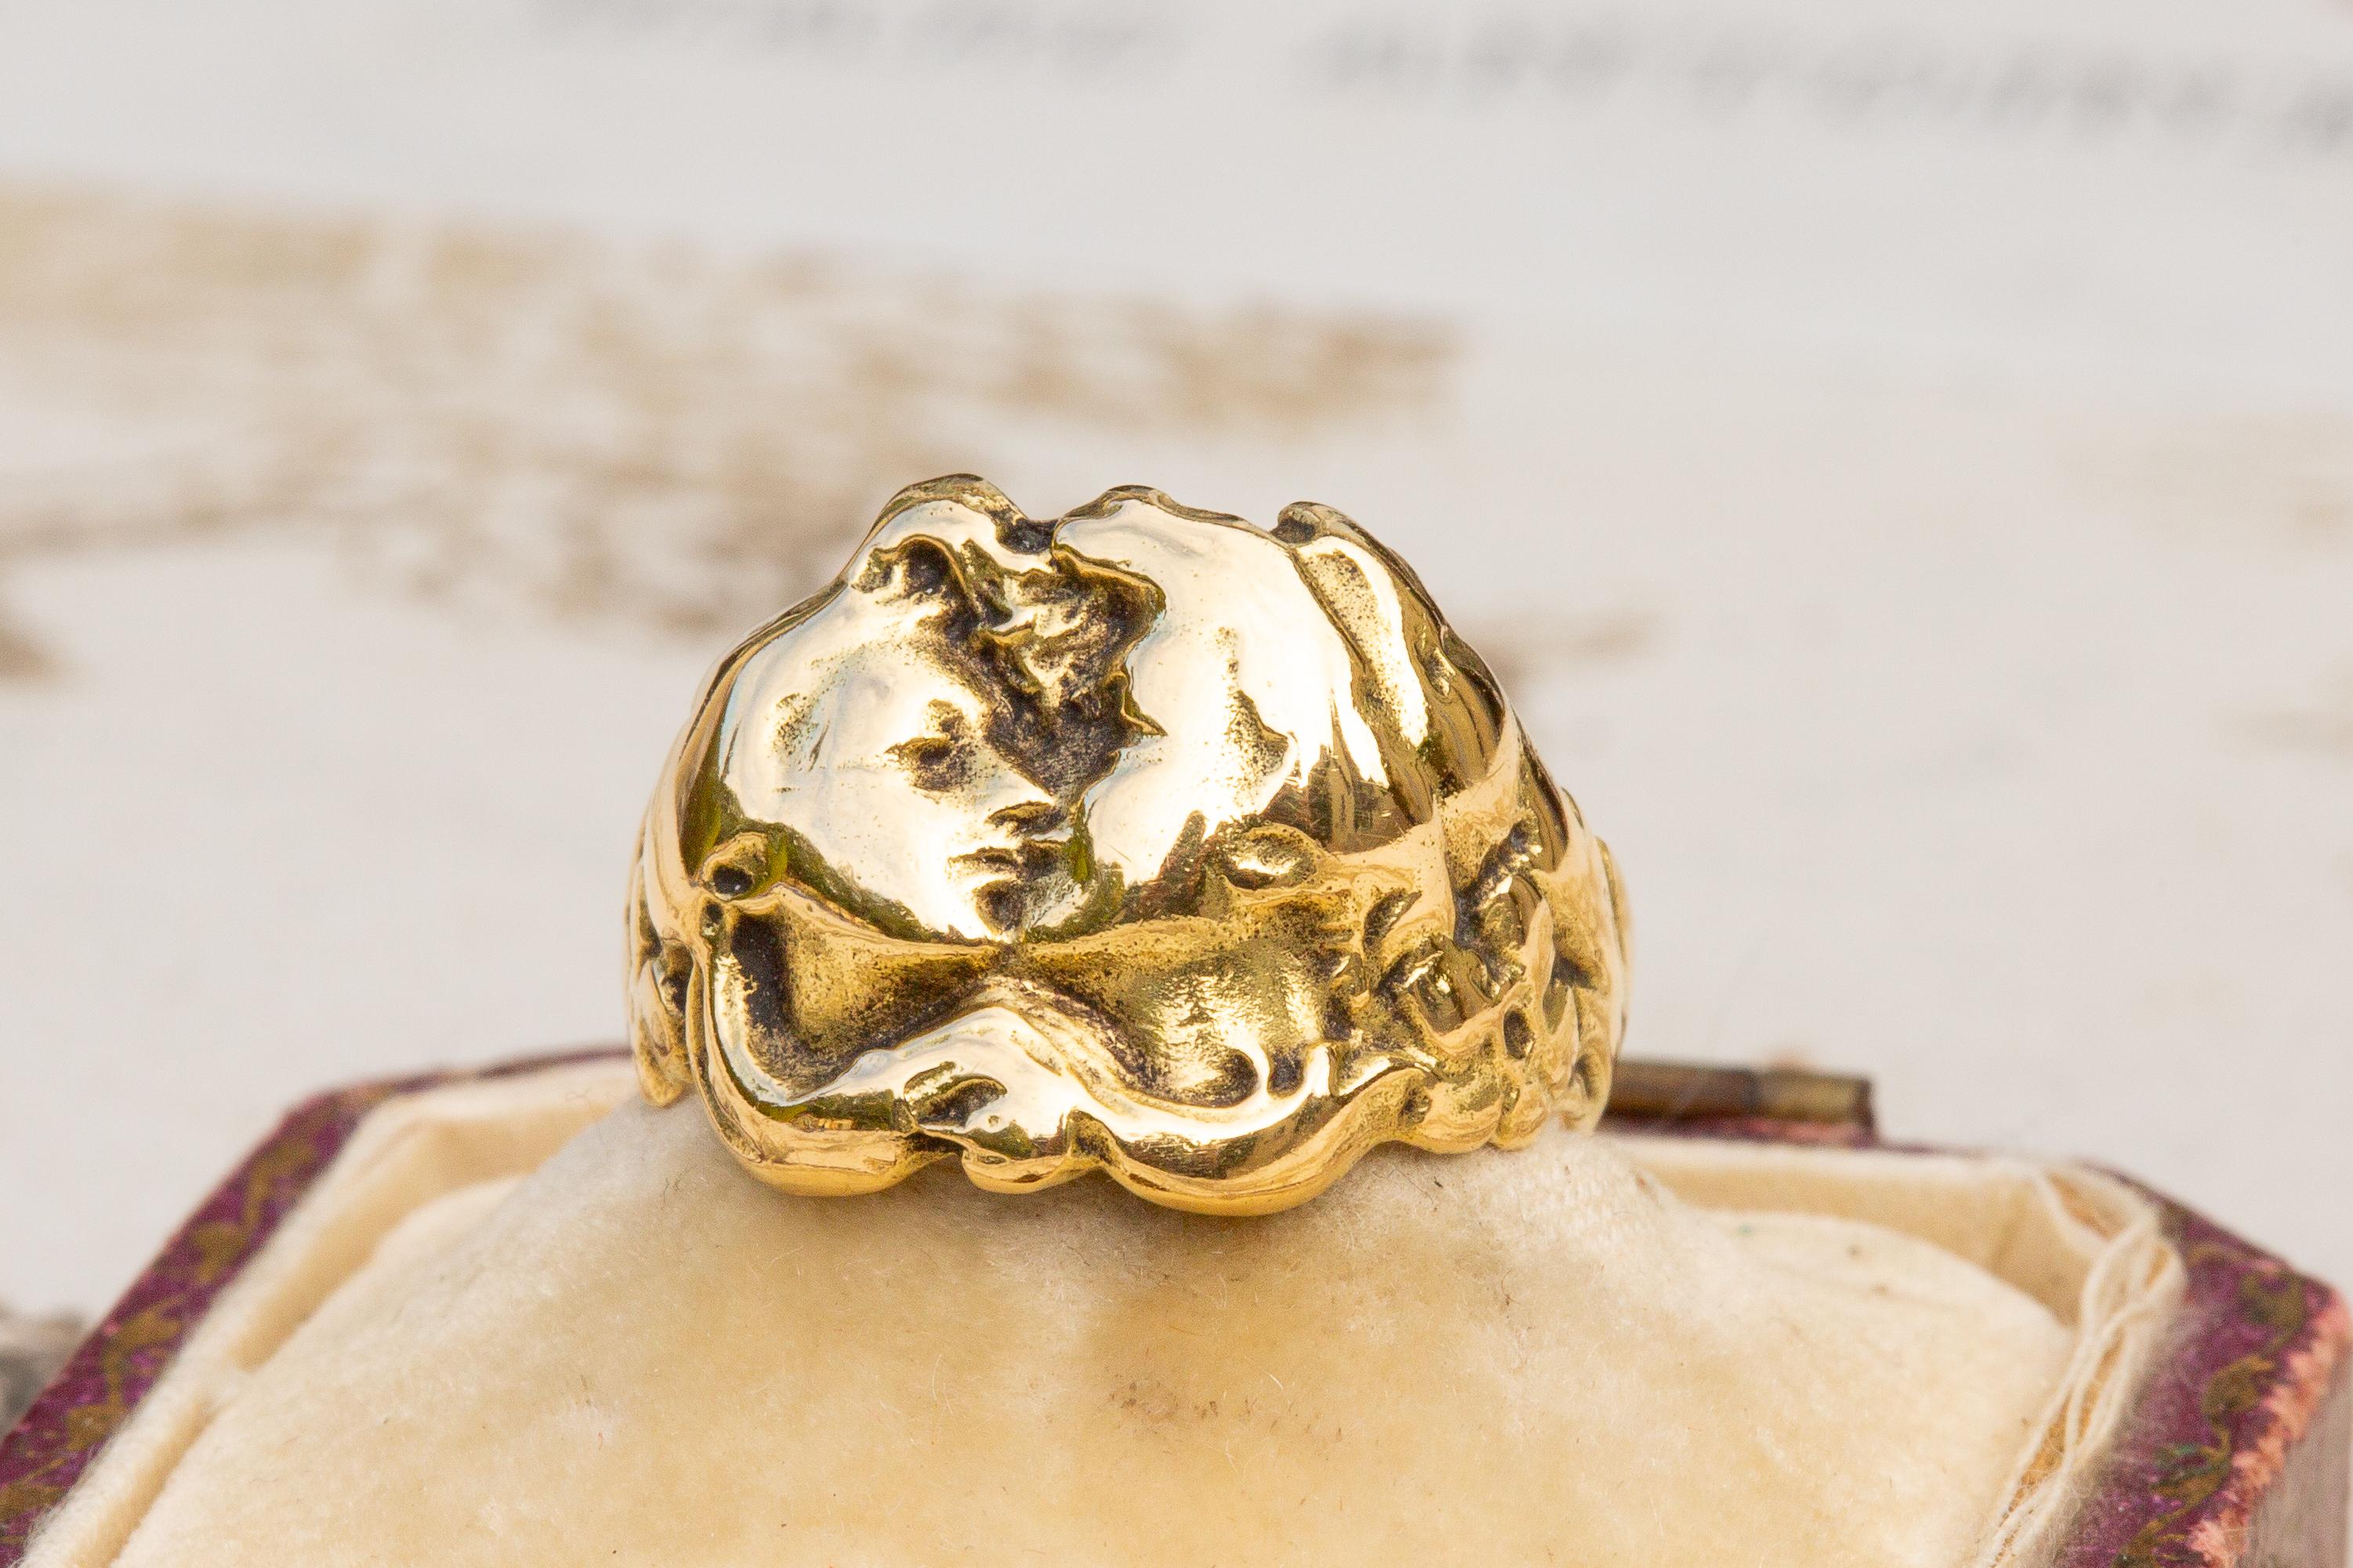  French Antique Art Nouveau 18K Gold Ethereal Figural Kissing Ring c.1910 6